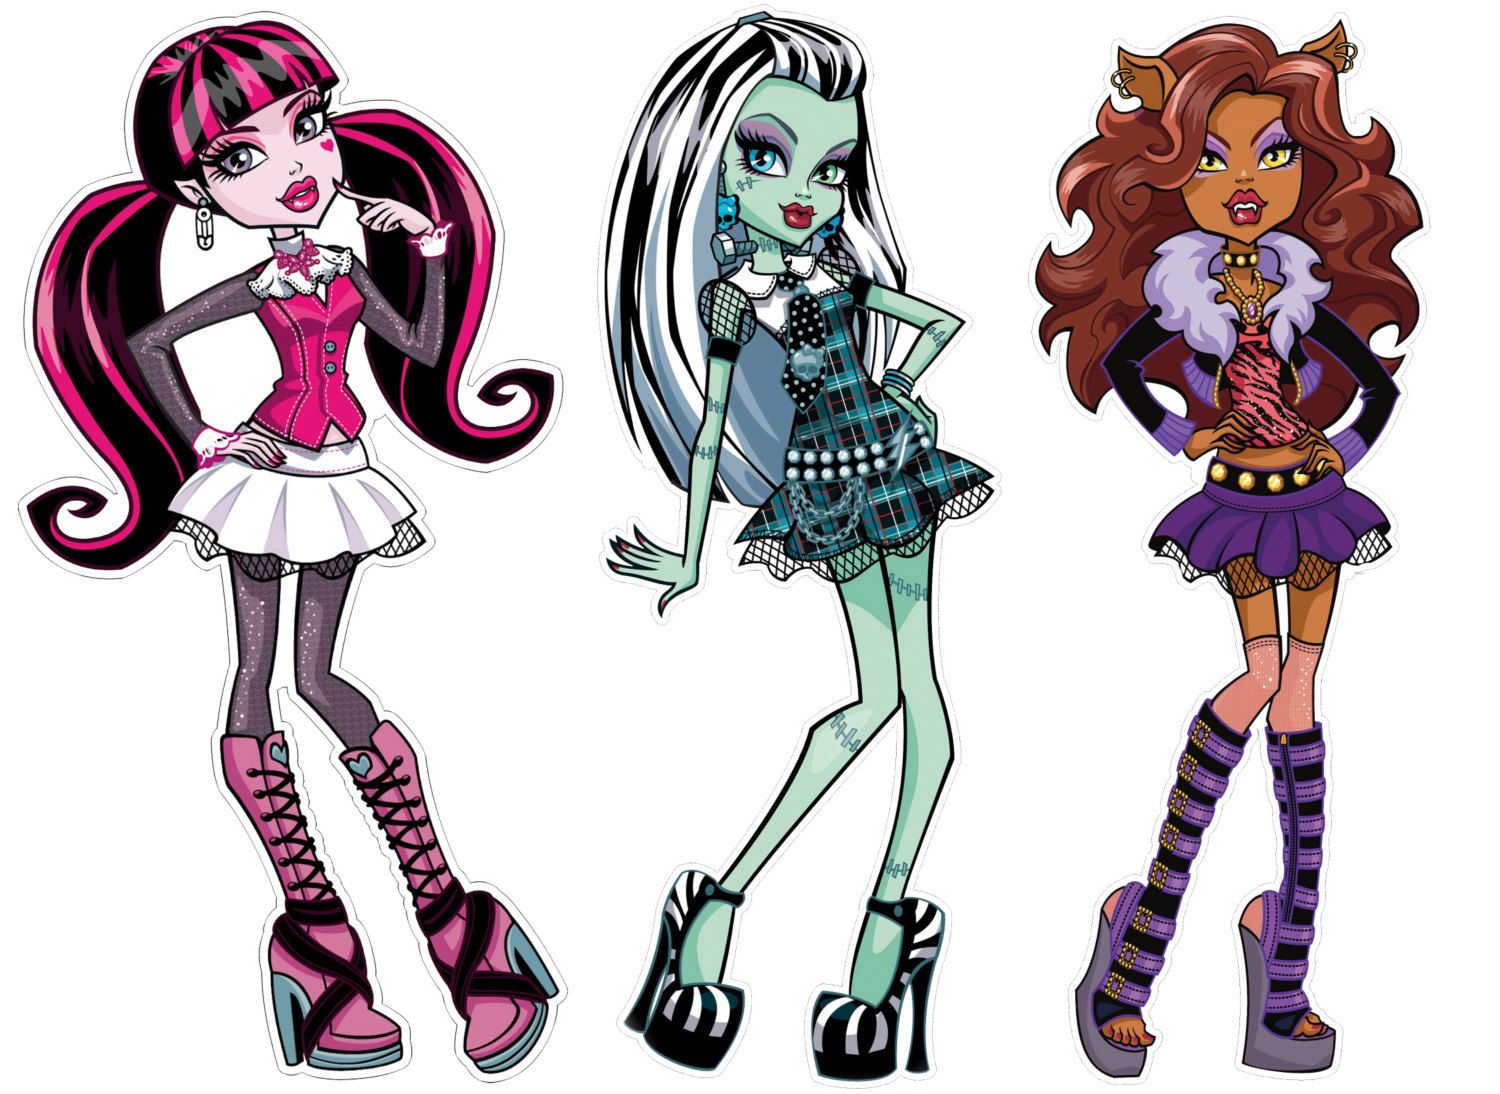 Draculaura, Frankie, and Clawdeen. Monster High.